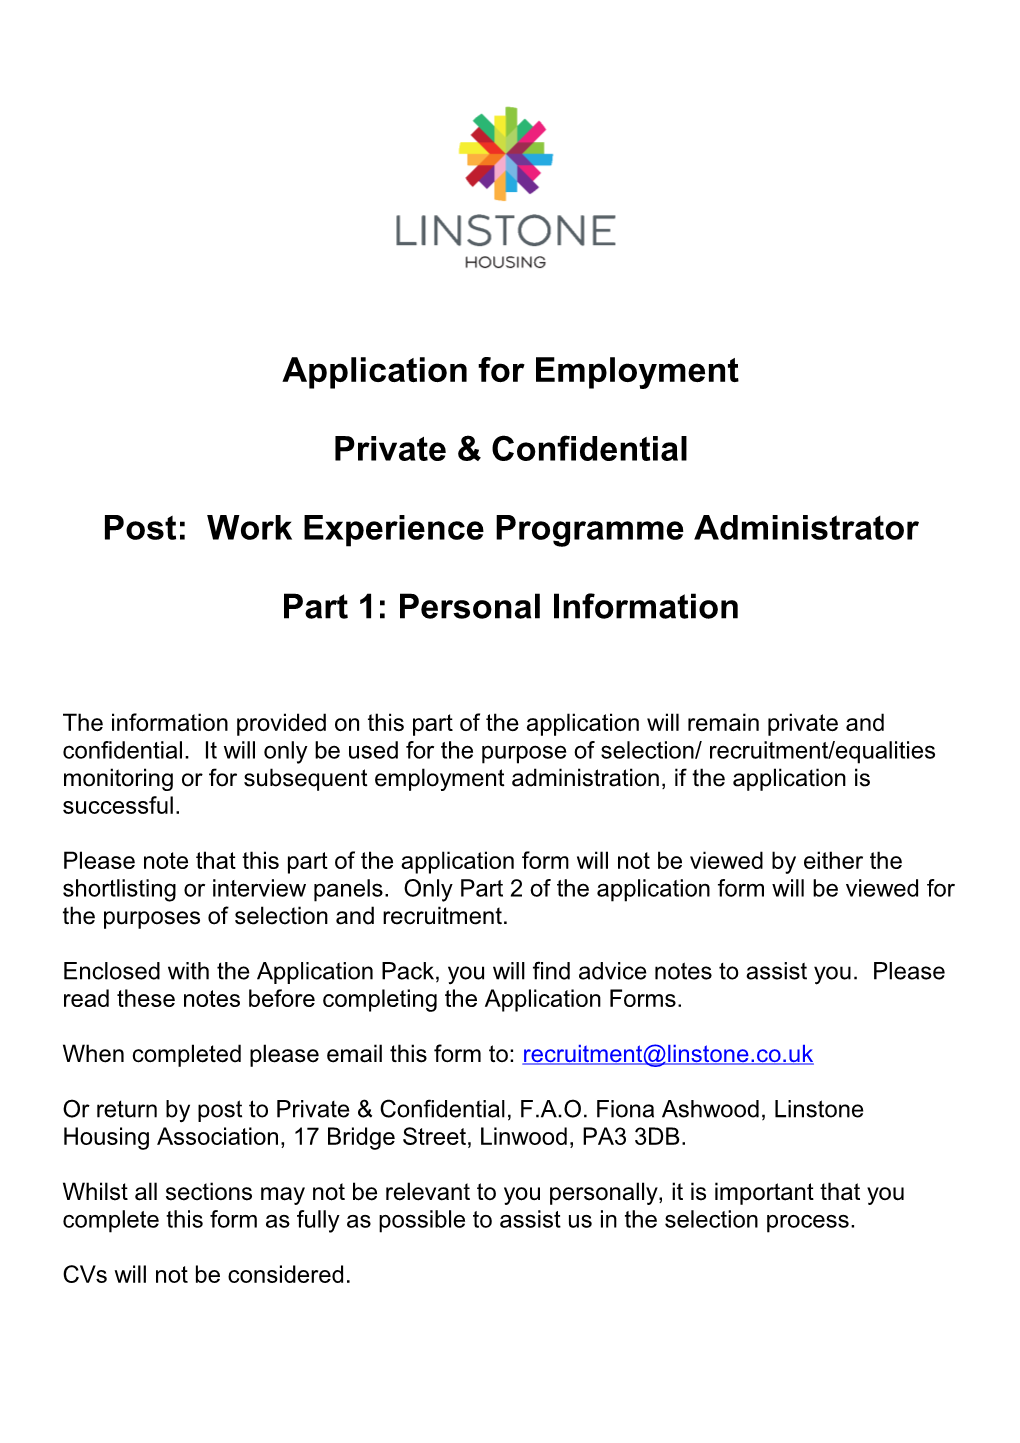 Post: Work Experience Programme Administrator